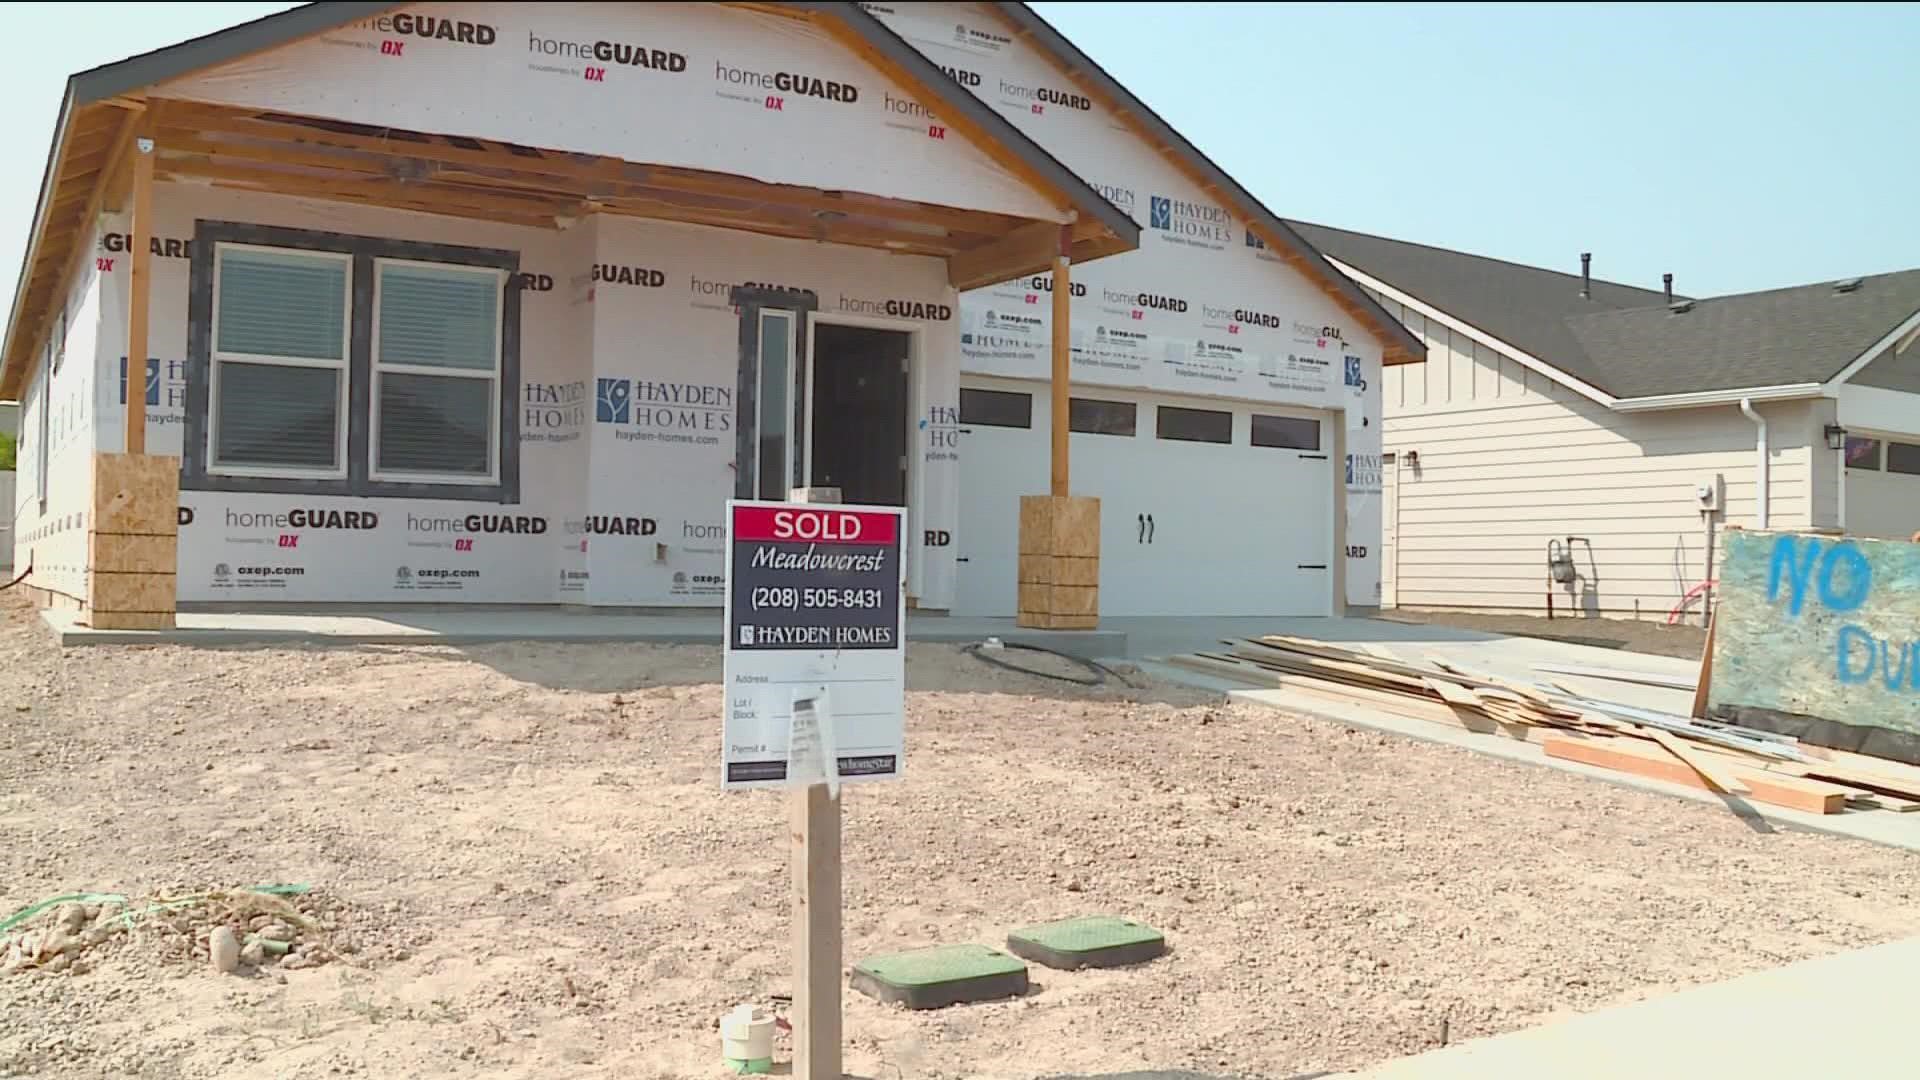 On the positive side, a Boise-area realtor says an "out-of-control" market is normalizing and there are more choices for potential home buyers.